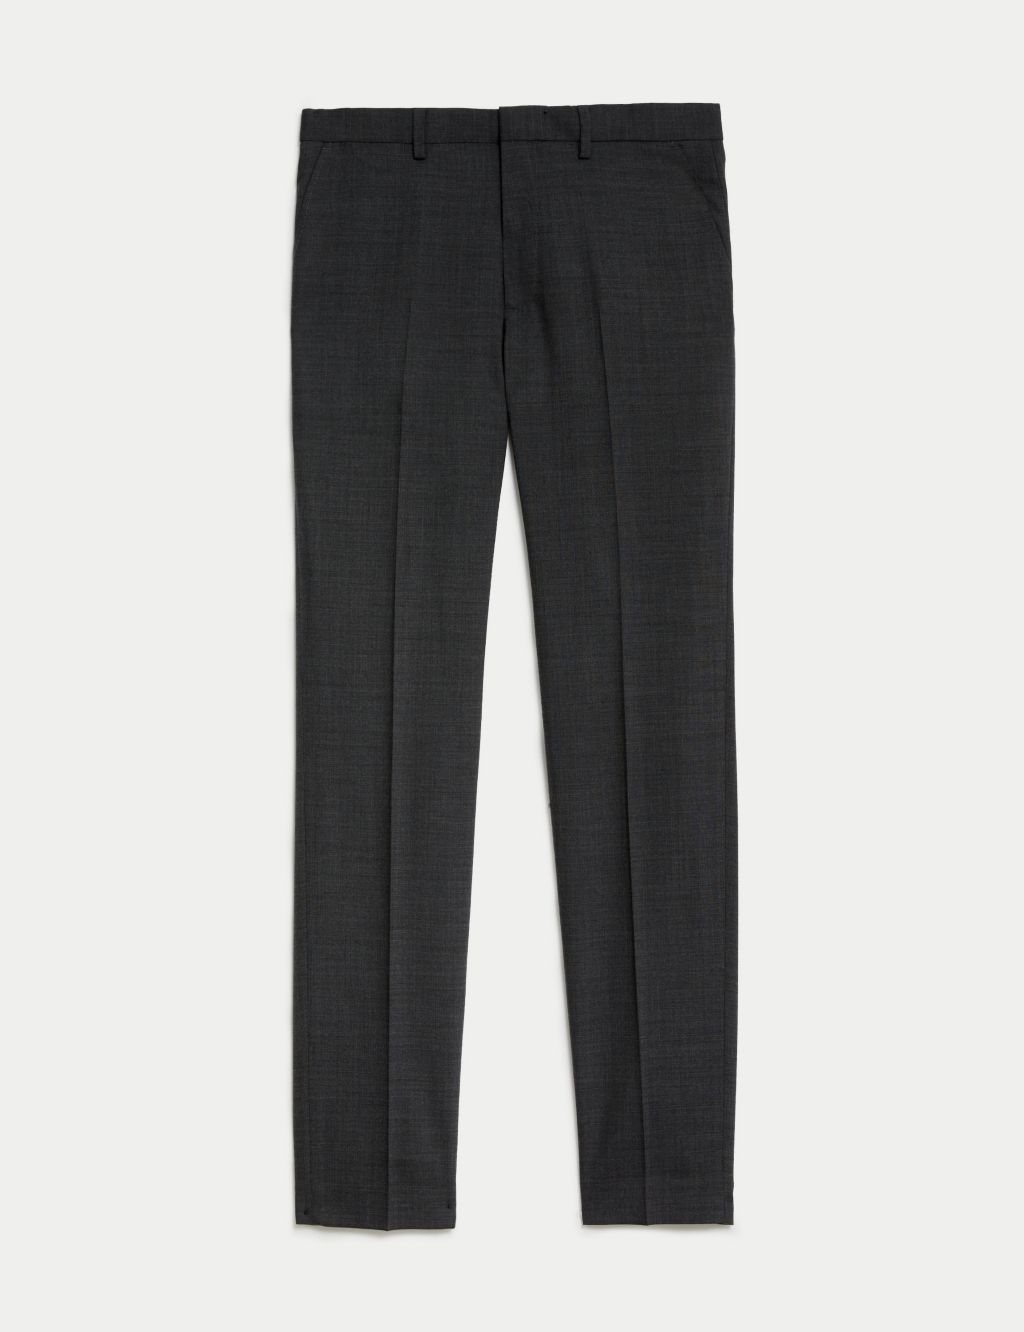 Wool Blend Flat Front Stretch Trousers image 7